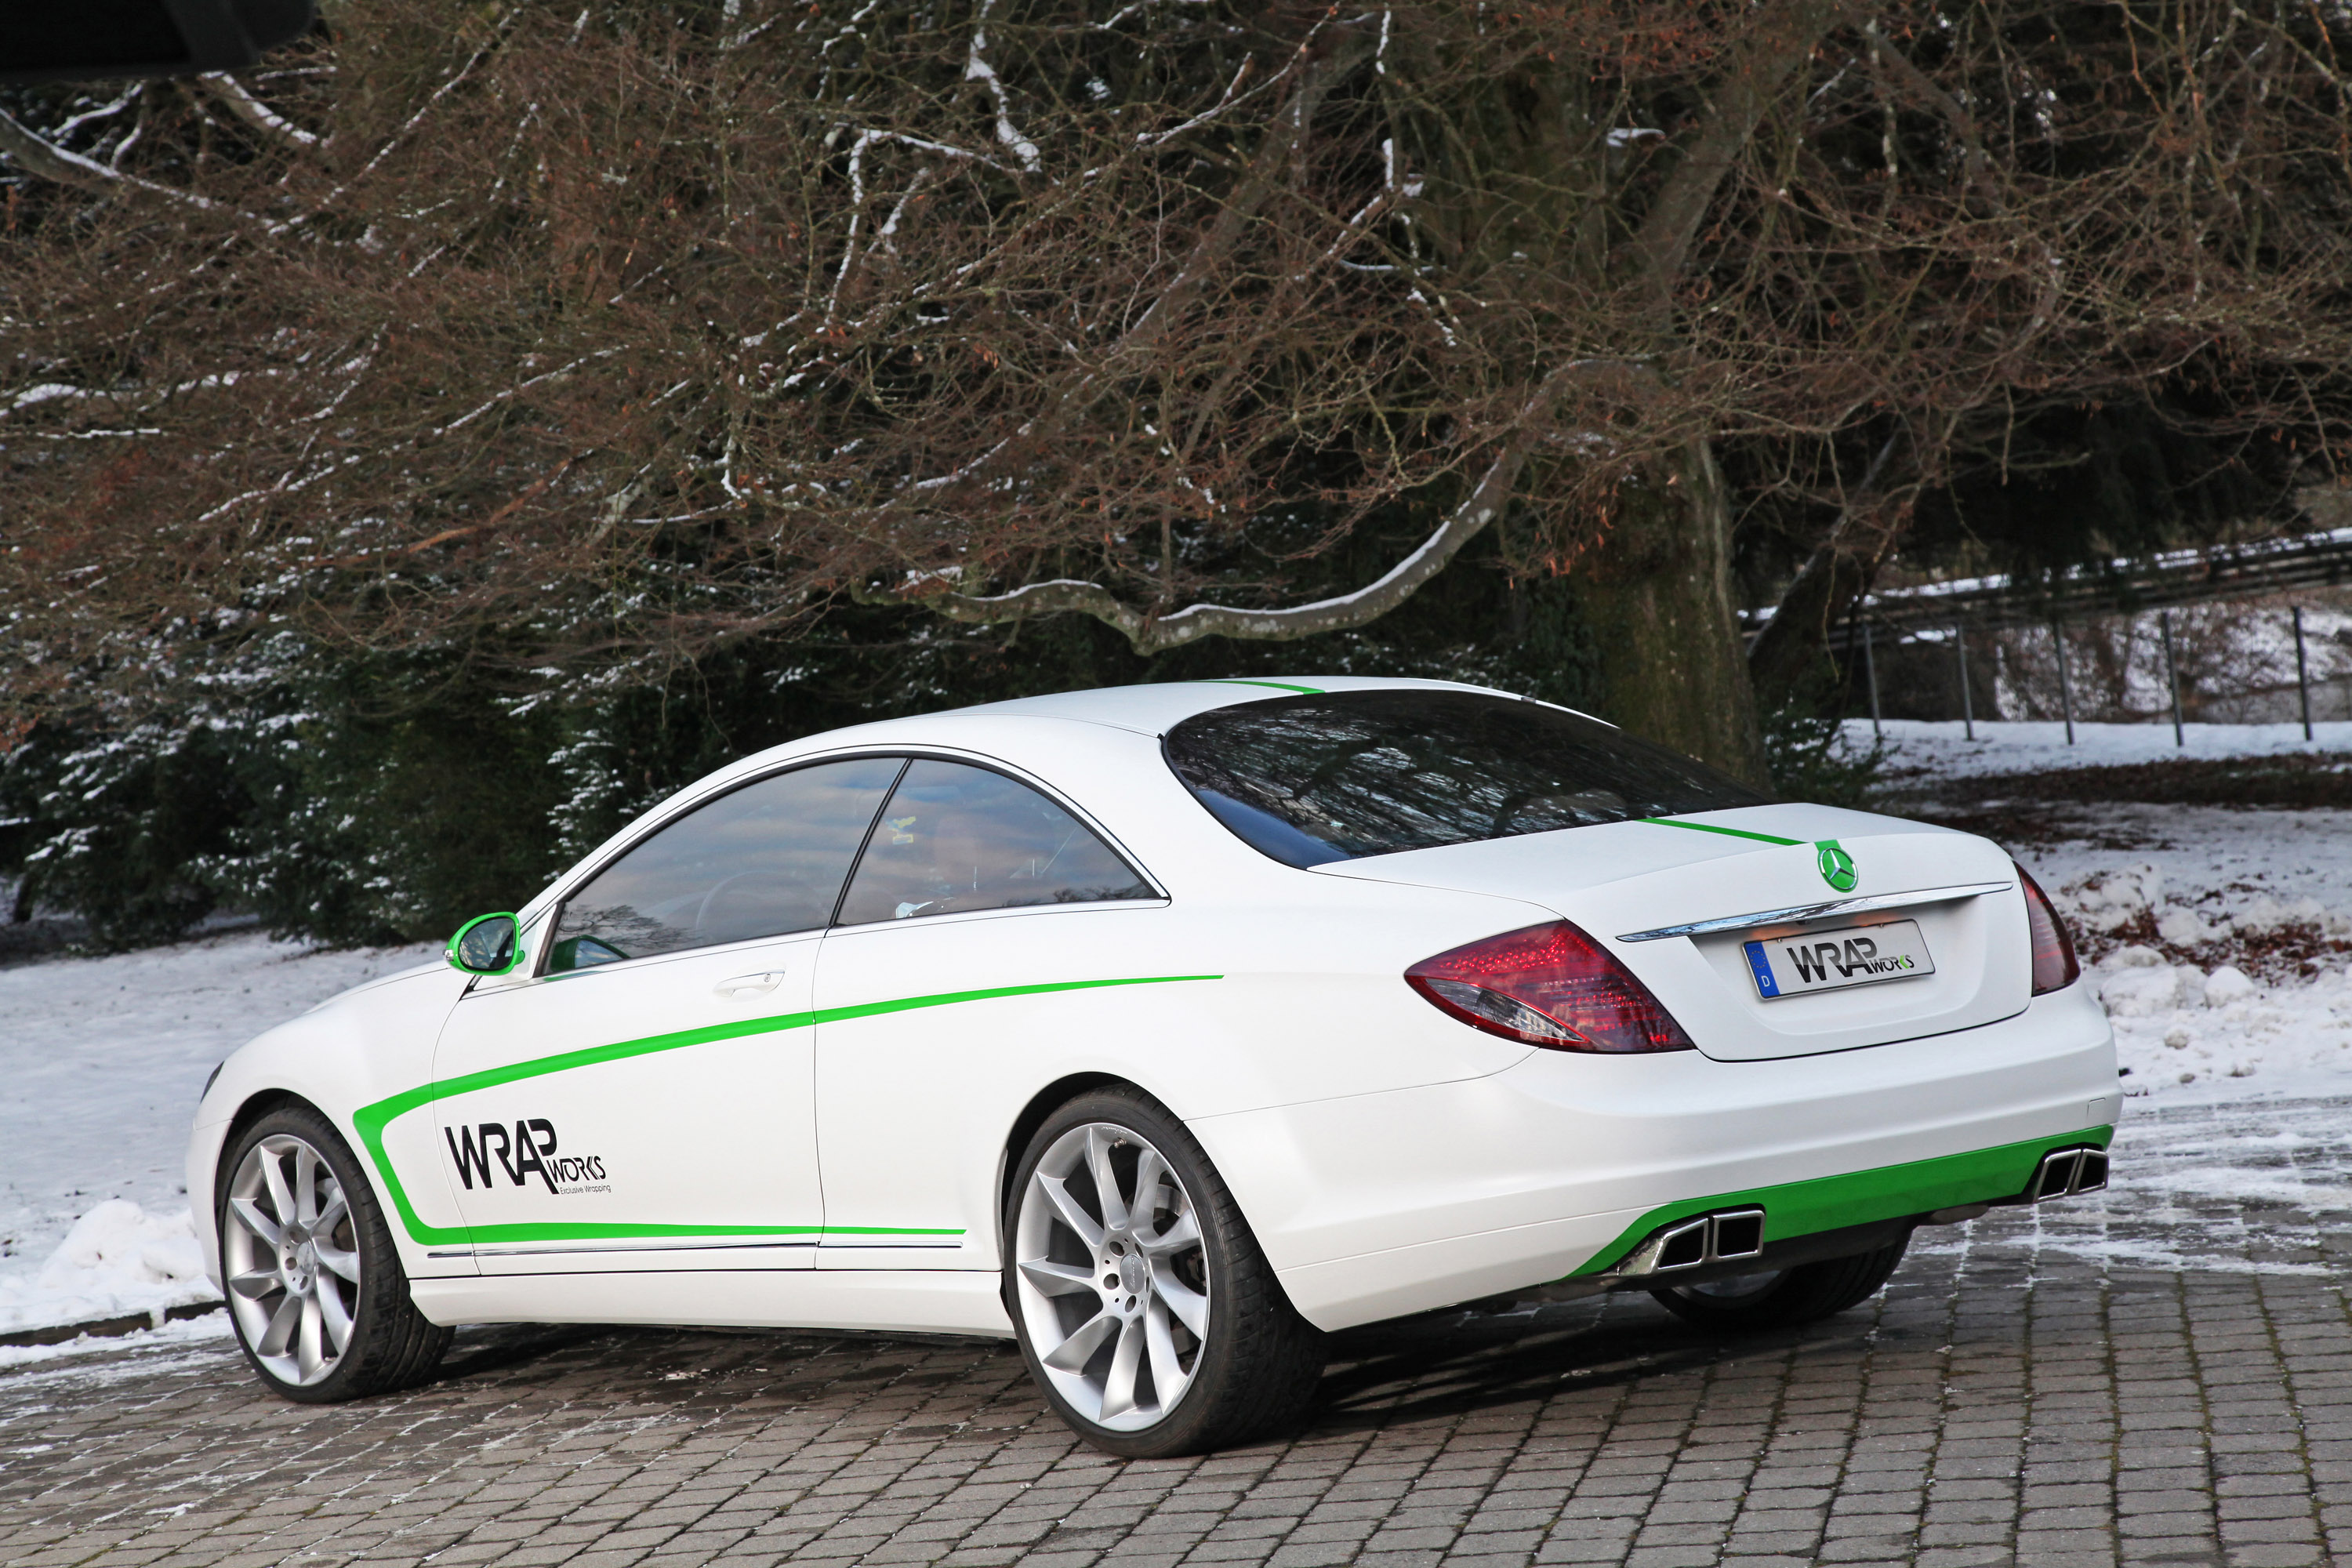 2013, Wrap, Works, Mercedes, Benz, Cl 500, Tuning Wallpaper